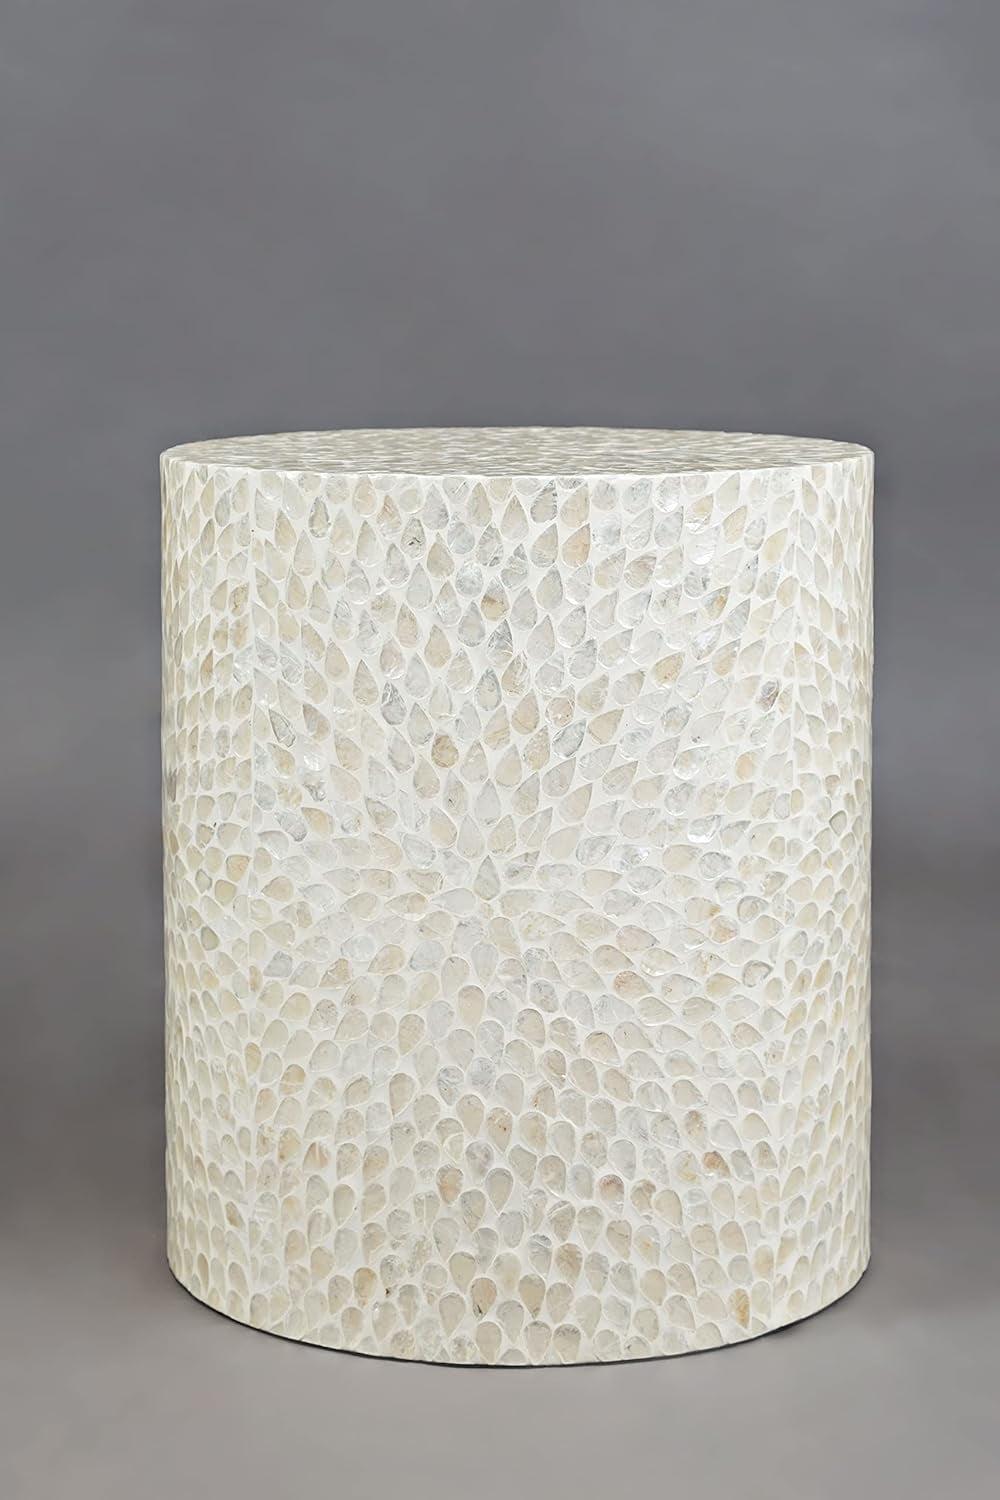 Transitional White Capiz Shell Round Accent Table, 16"